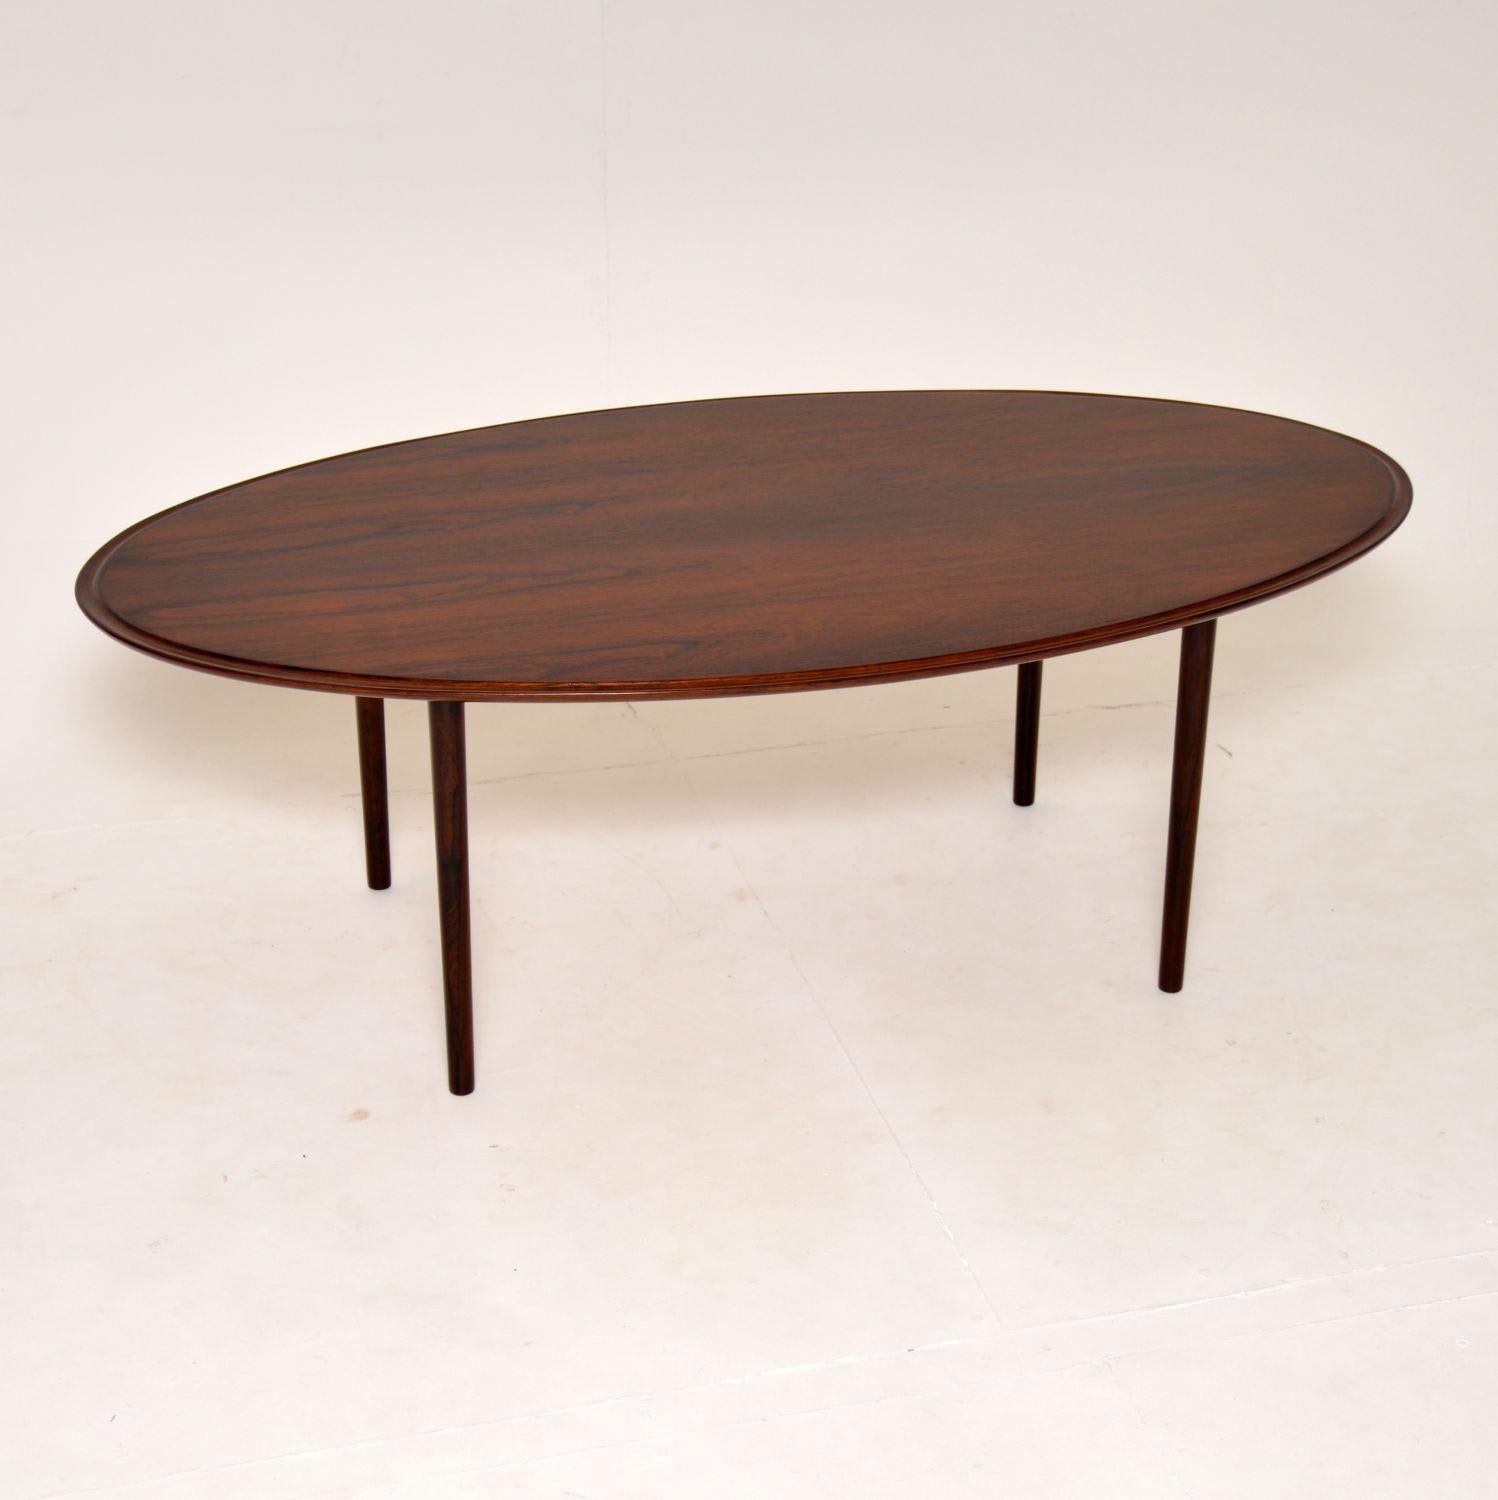 A large and impressive Danish wood oval coffee table. This was made in Denmark, it dates from the 1960’s.

The quality is superb, this is a great size and is really well made. The large oval top has a nicely moulded edge and this sits on turned